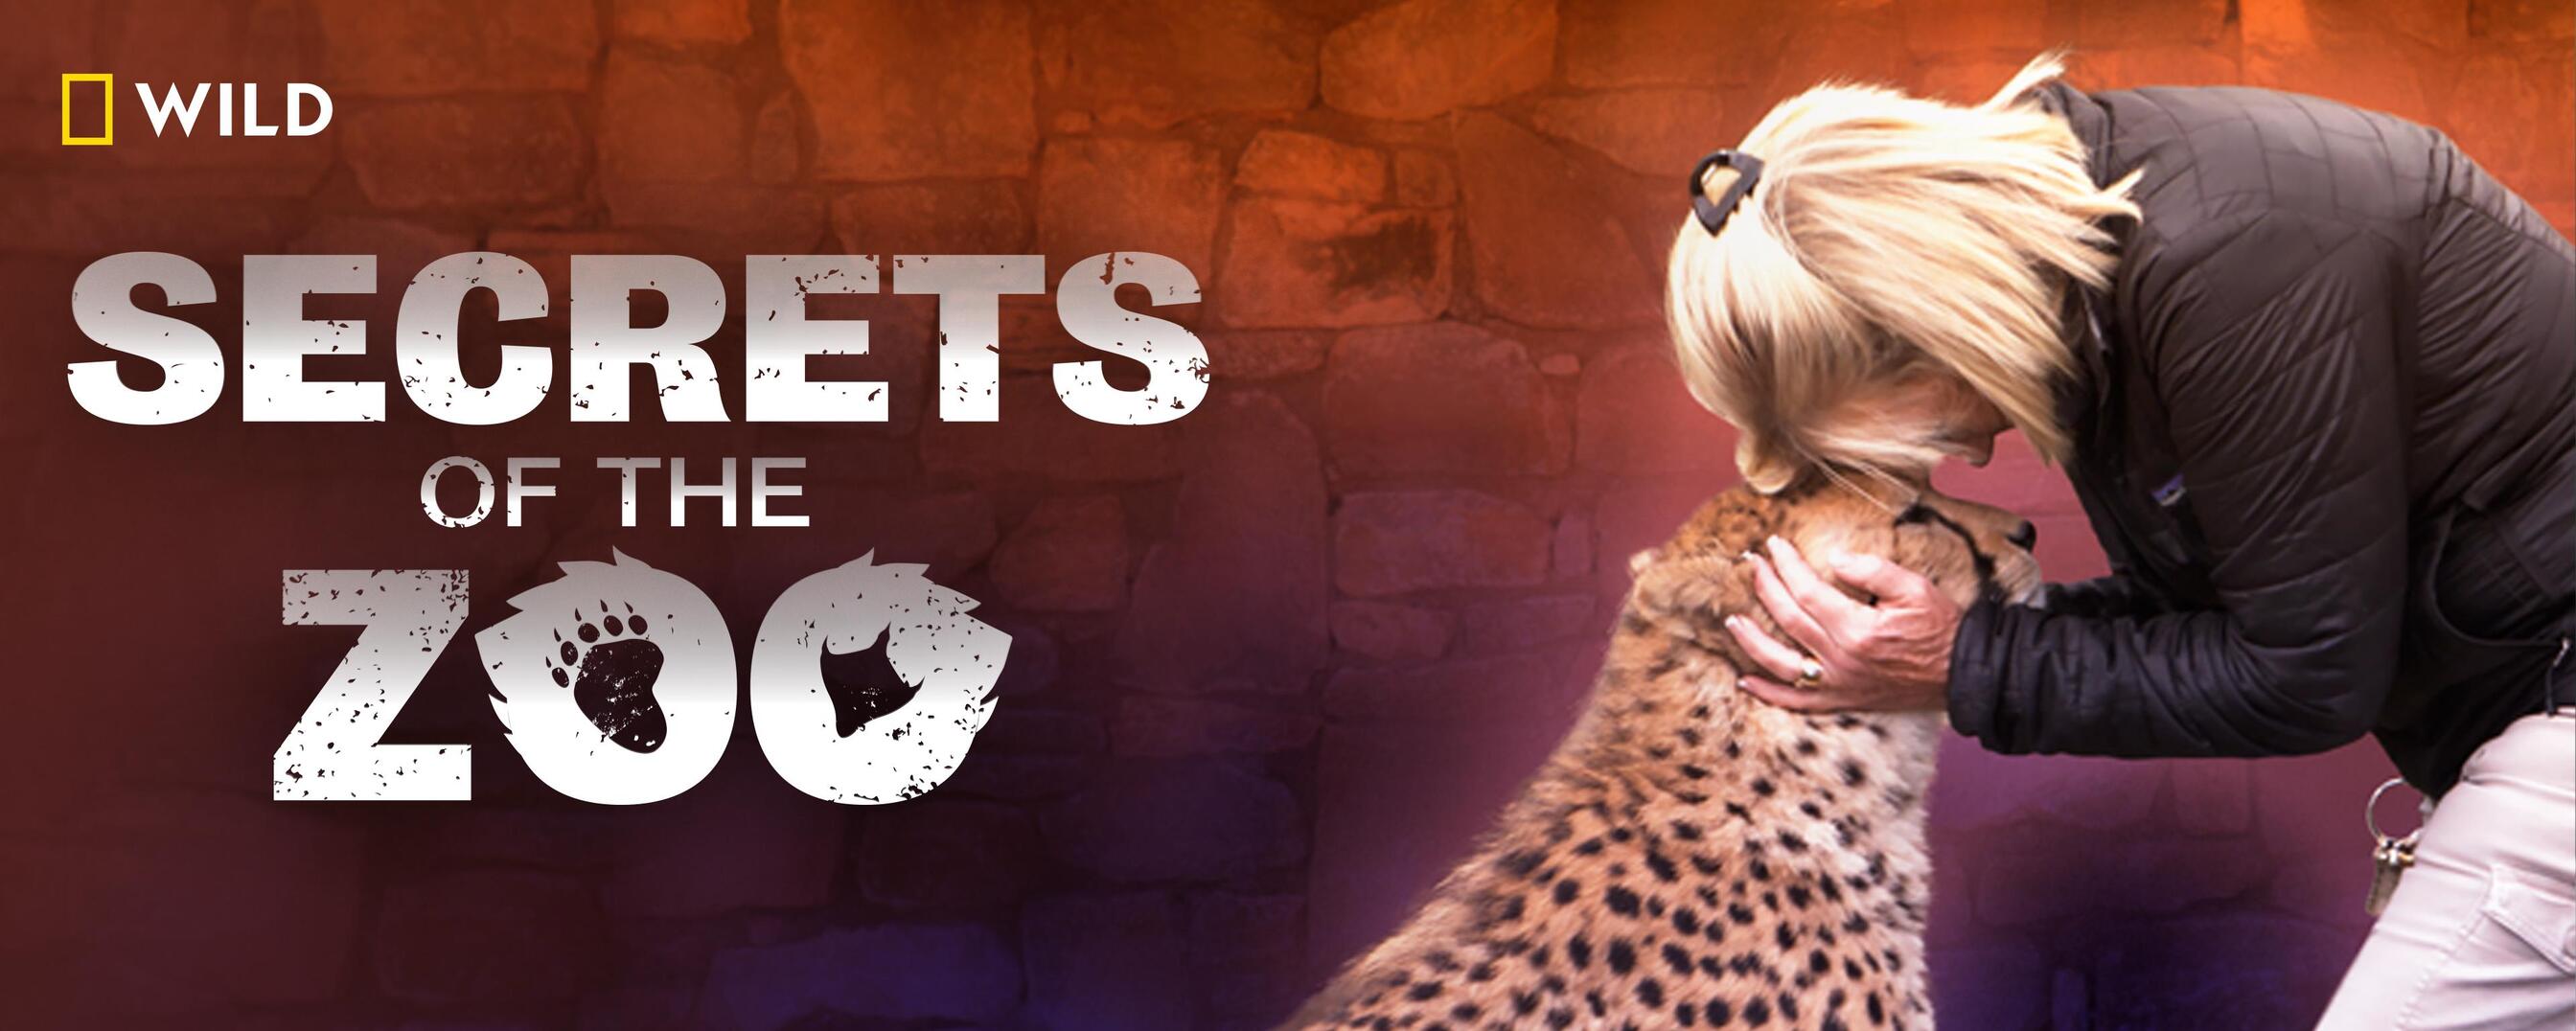 About Secrets of the Zoo TV Show Series